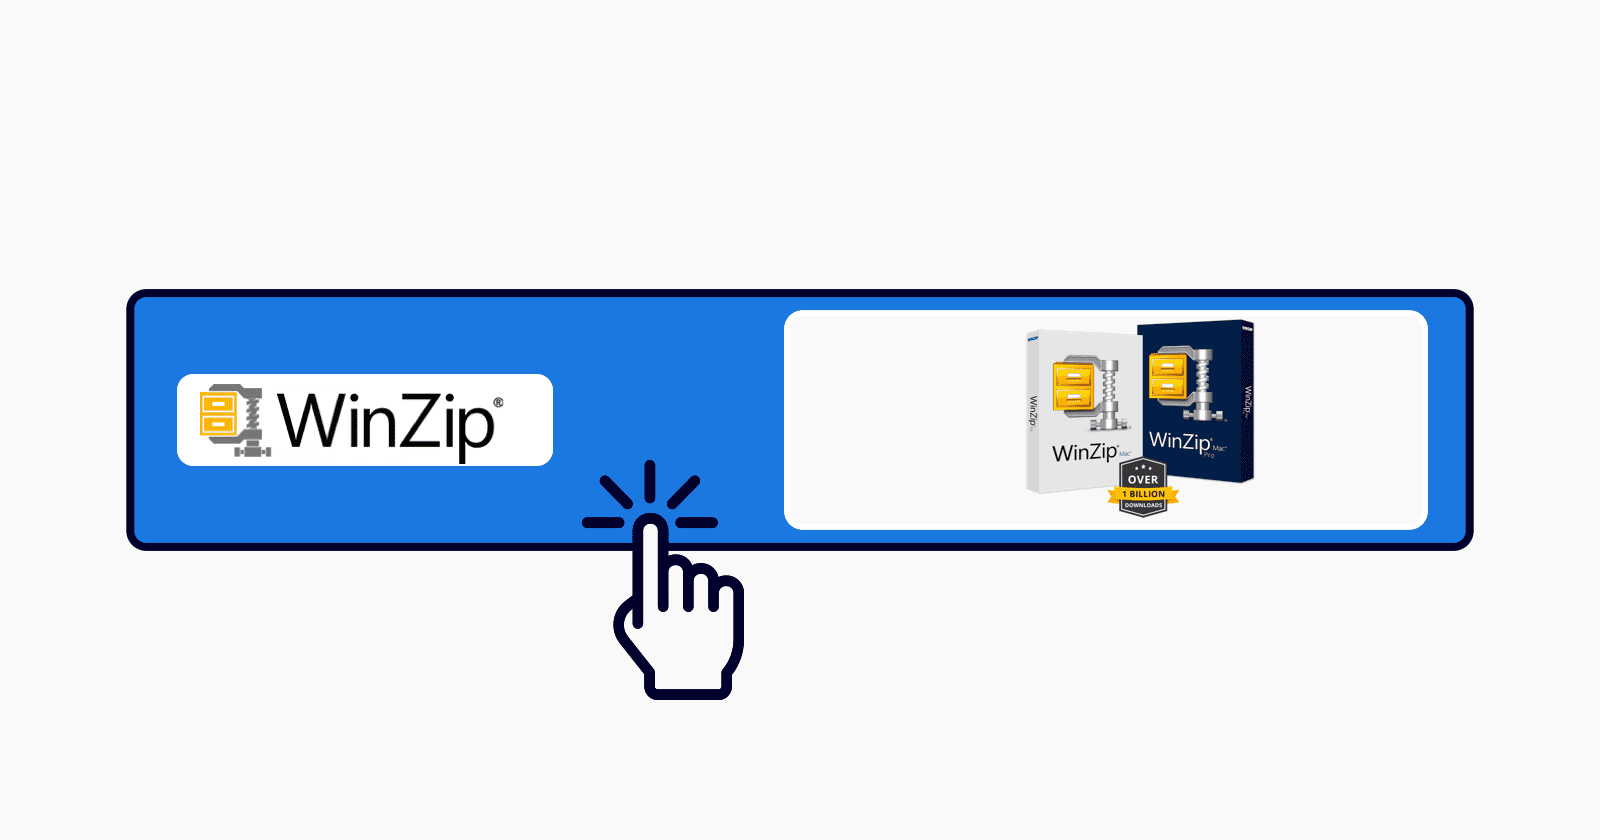 Save 40% WinZip Offers Discount Payment New Purchases